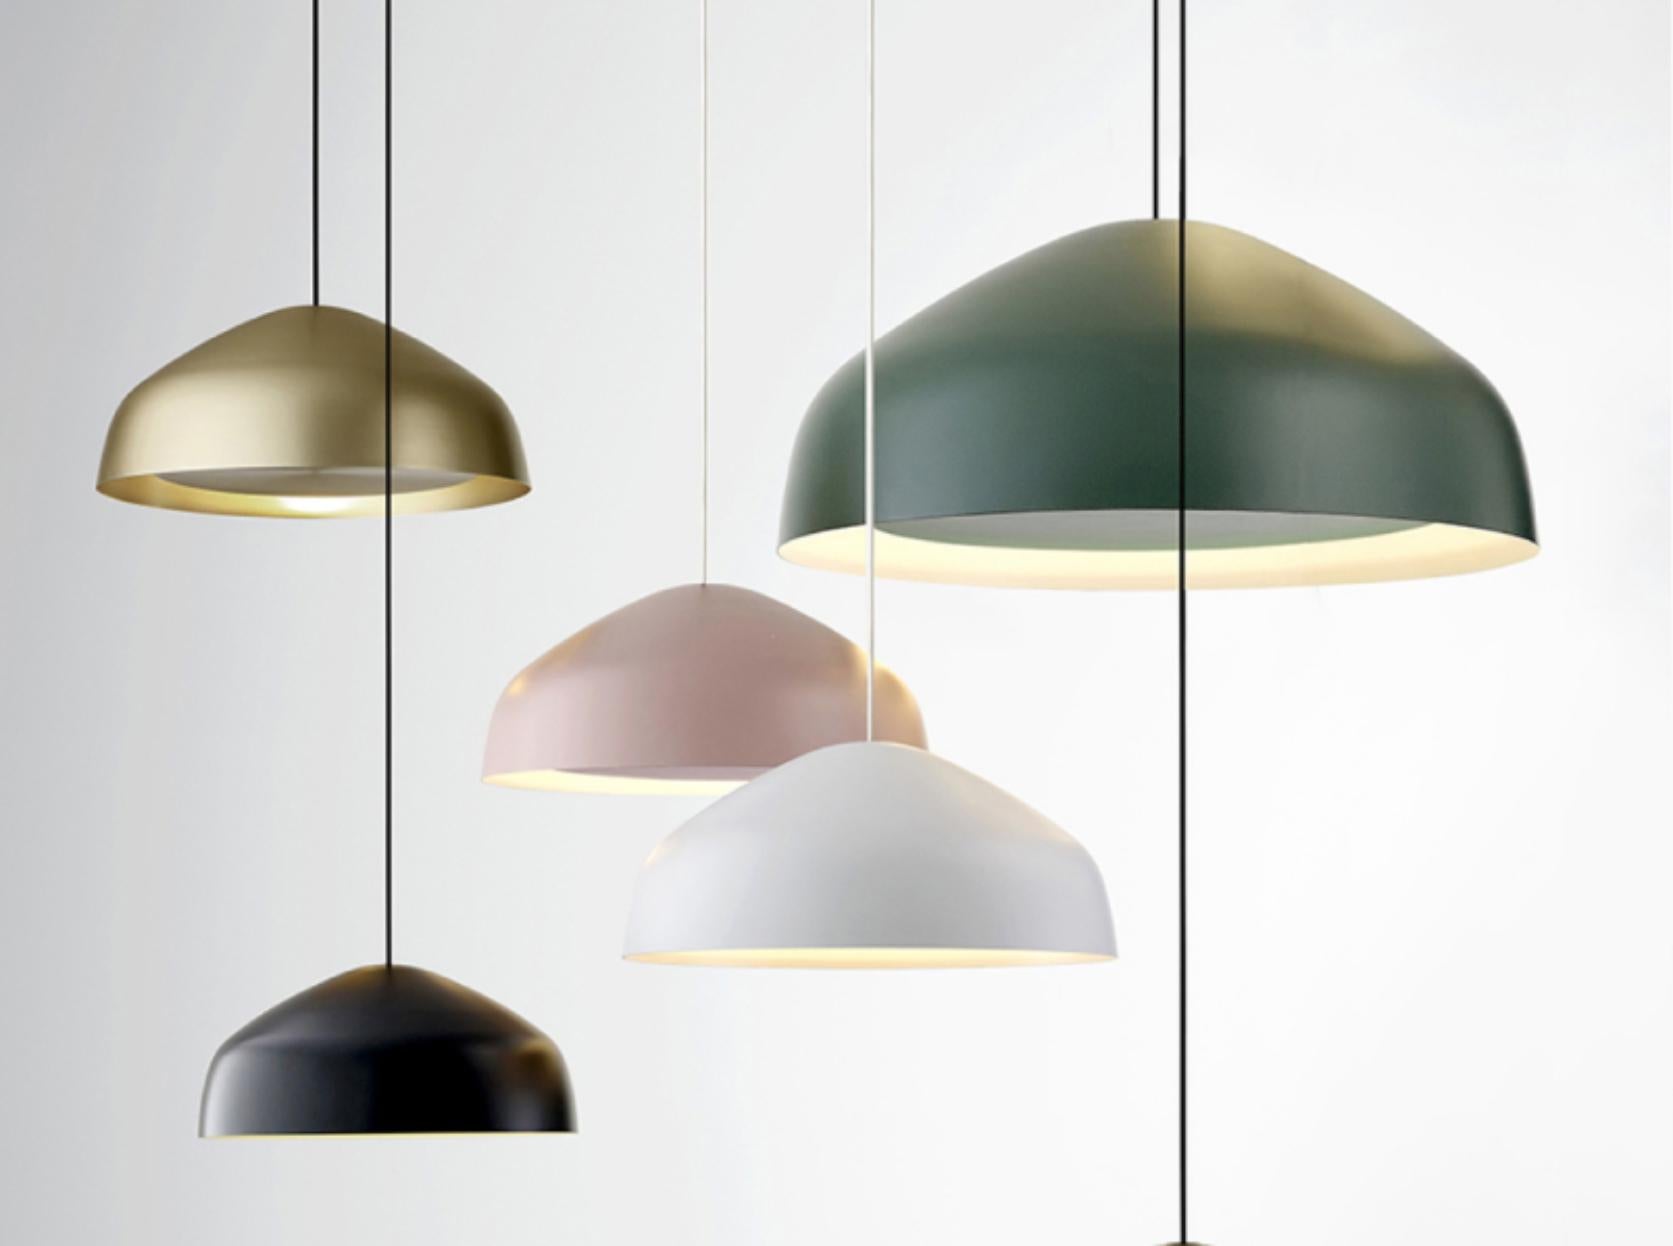 Sitting between the timeless and the contemporary, the Ora pendant by Ross Gardam, features a floating disk surrounded by a beautifully gentle glow. This striking gold shade is hand-spun, anodized aluminum and includes a 5